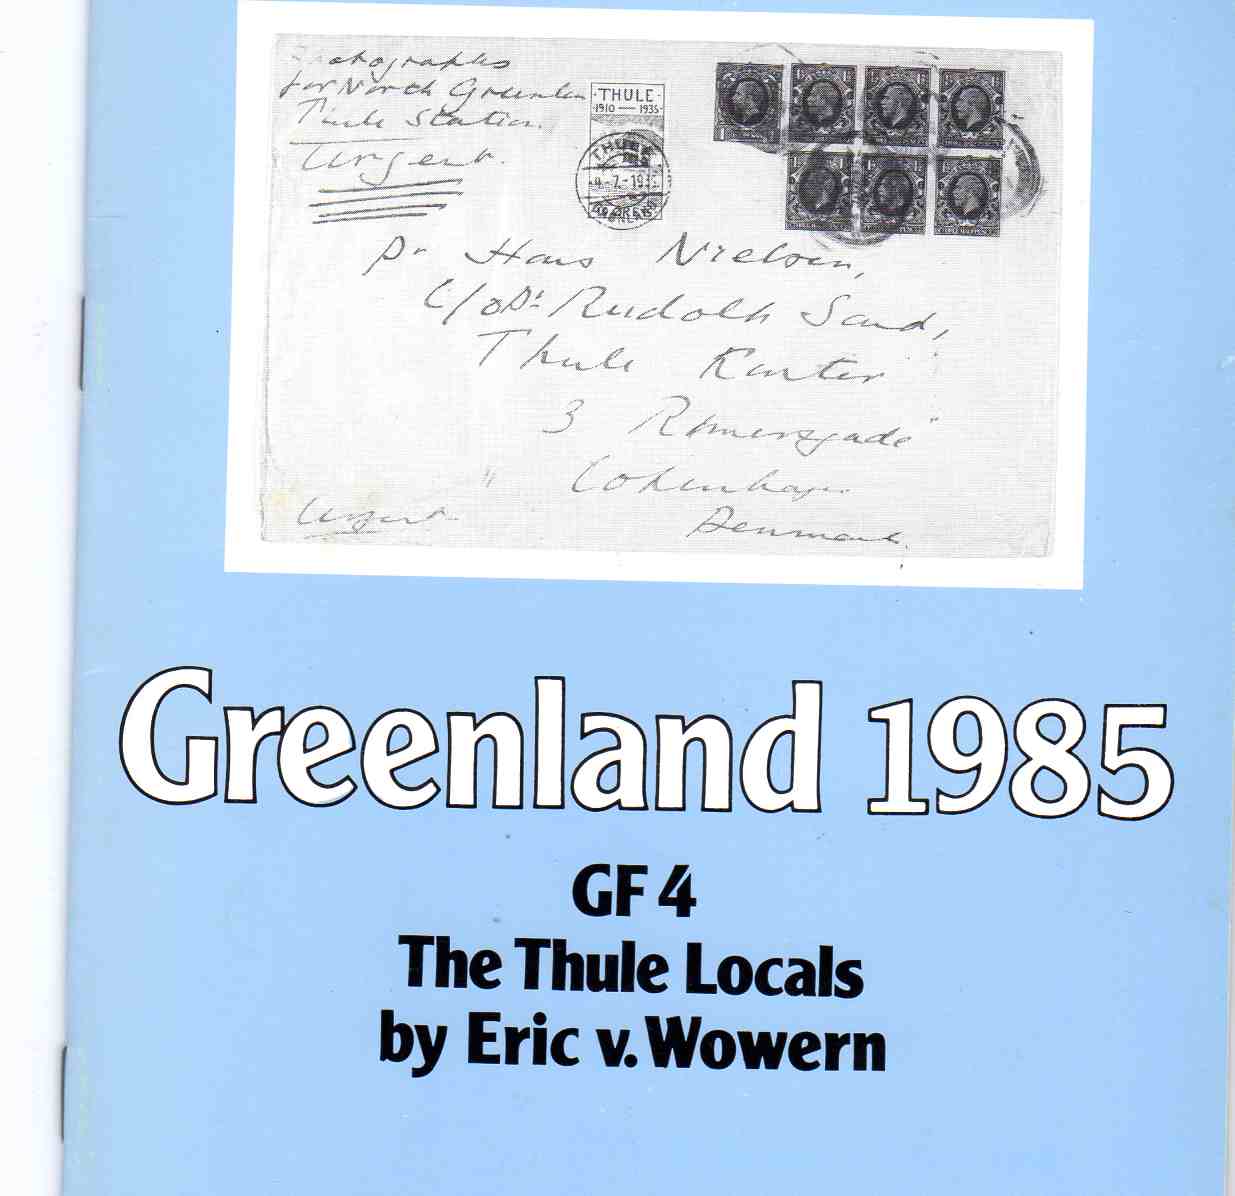 Greenland 1985 GF4 The Thule locals Eric C Wowern